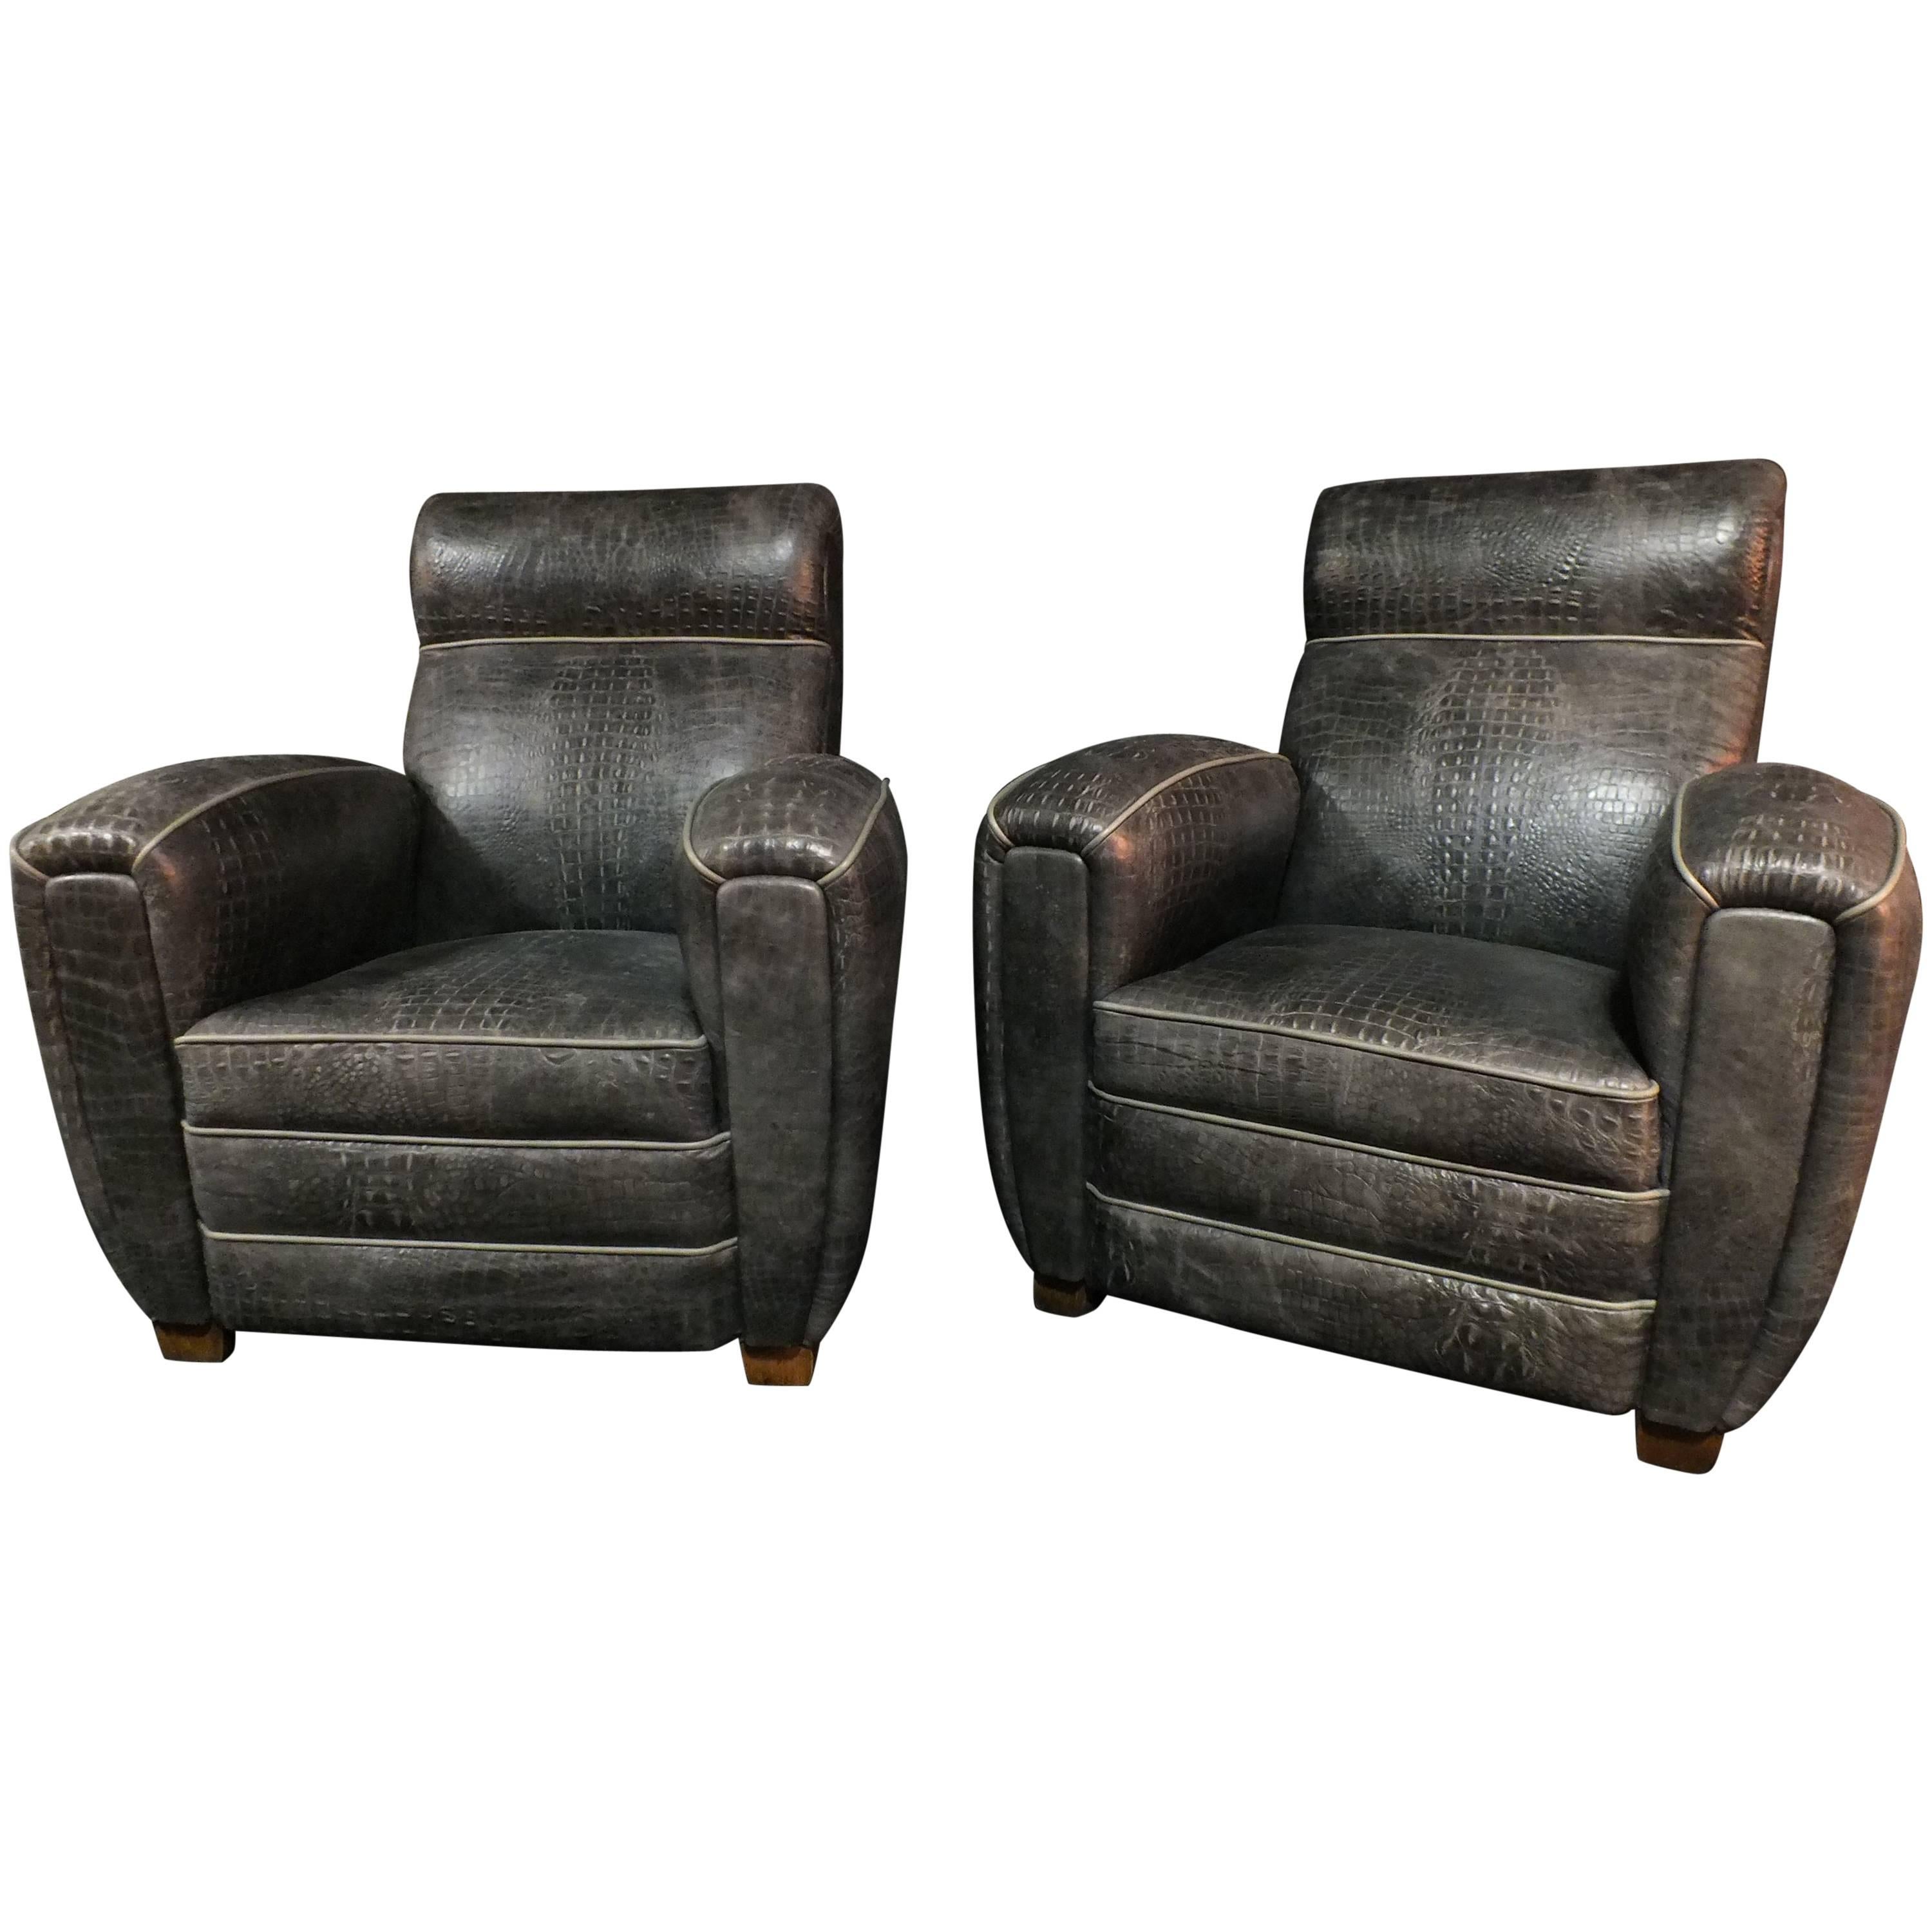 Two Club Chair Croco Style Art Deco For Sale